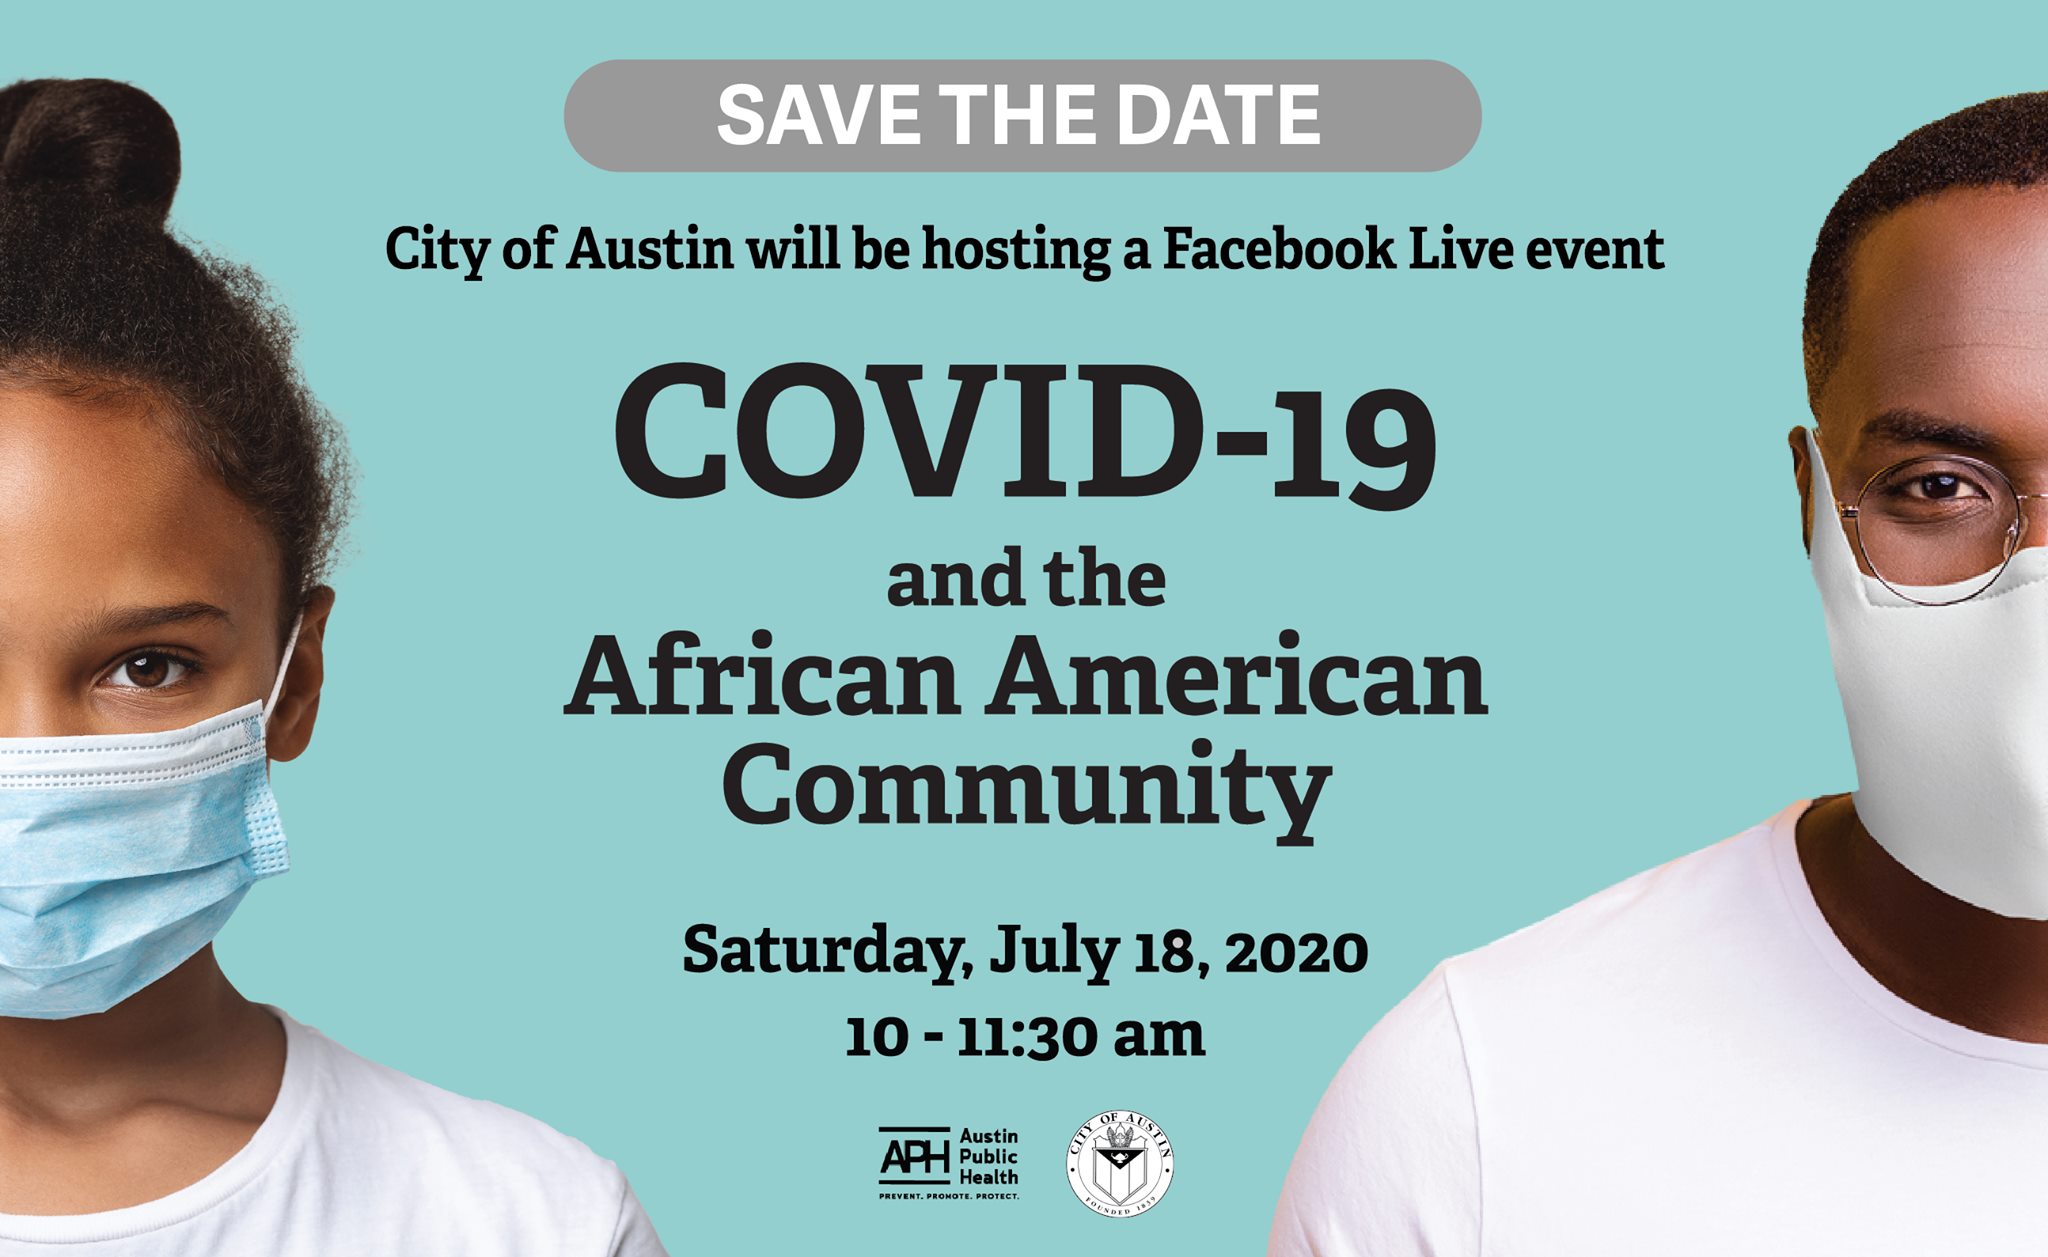 COVID-19 and the African American Community